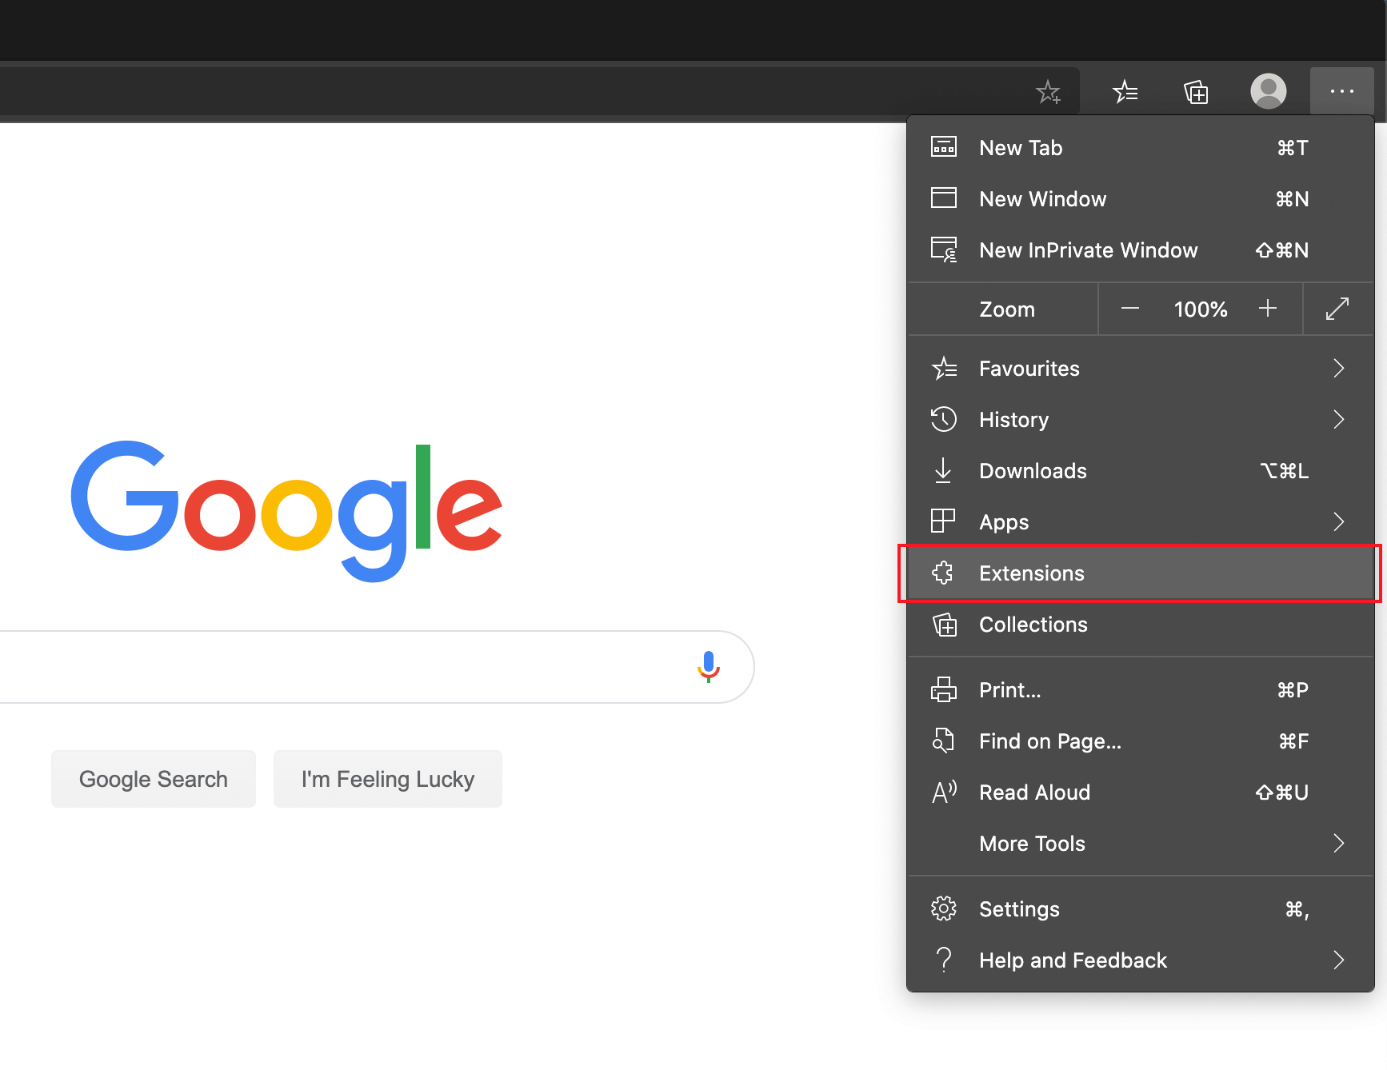 You can find the “Extensions” menu in the top-right corner of the Edge browser